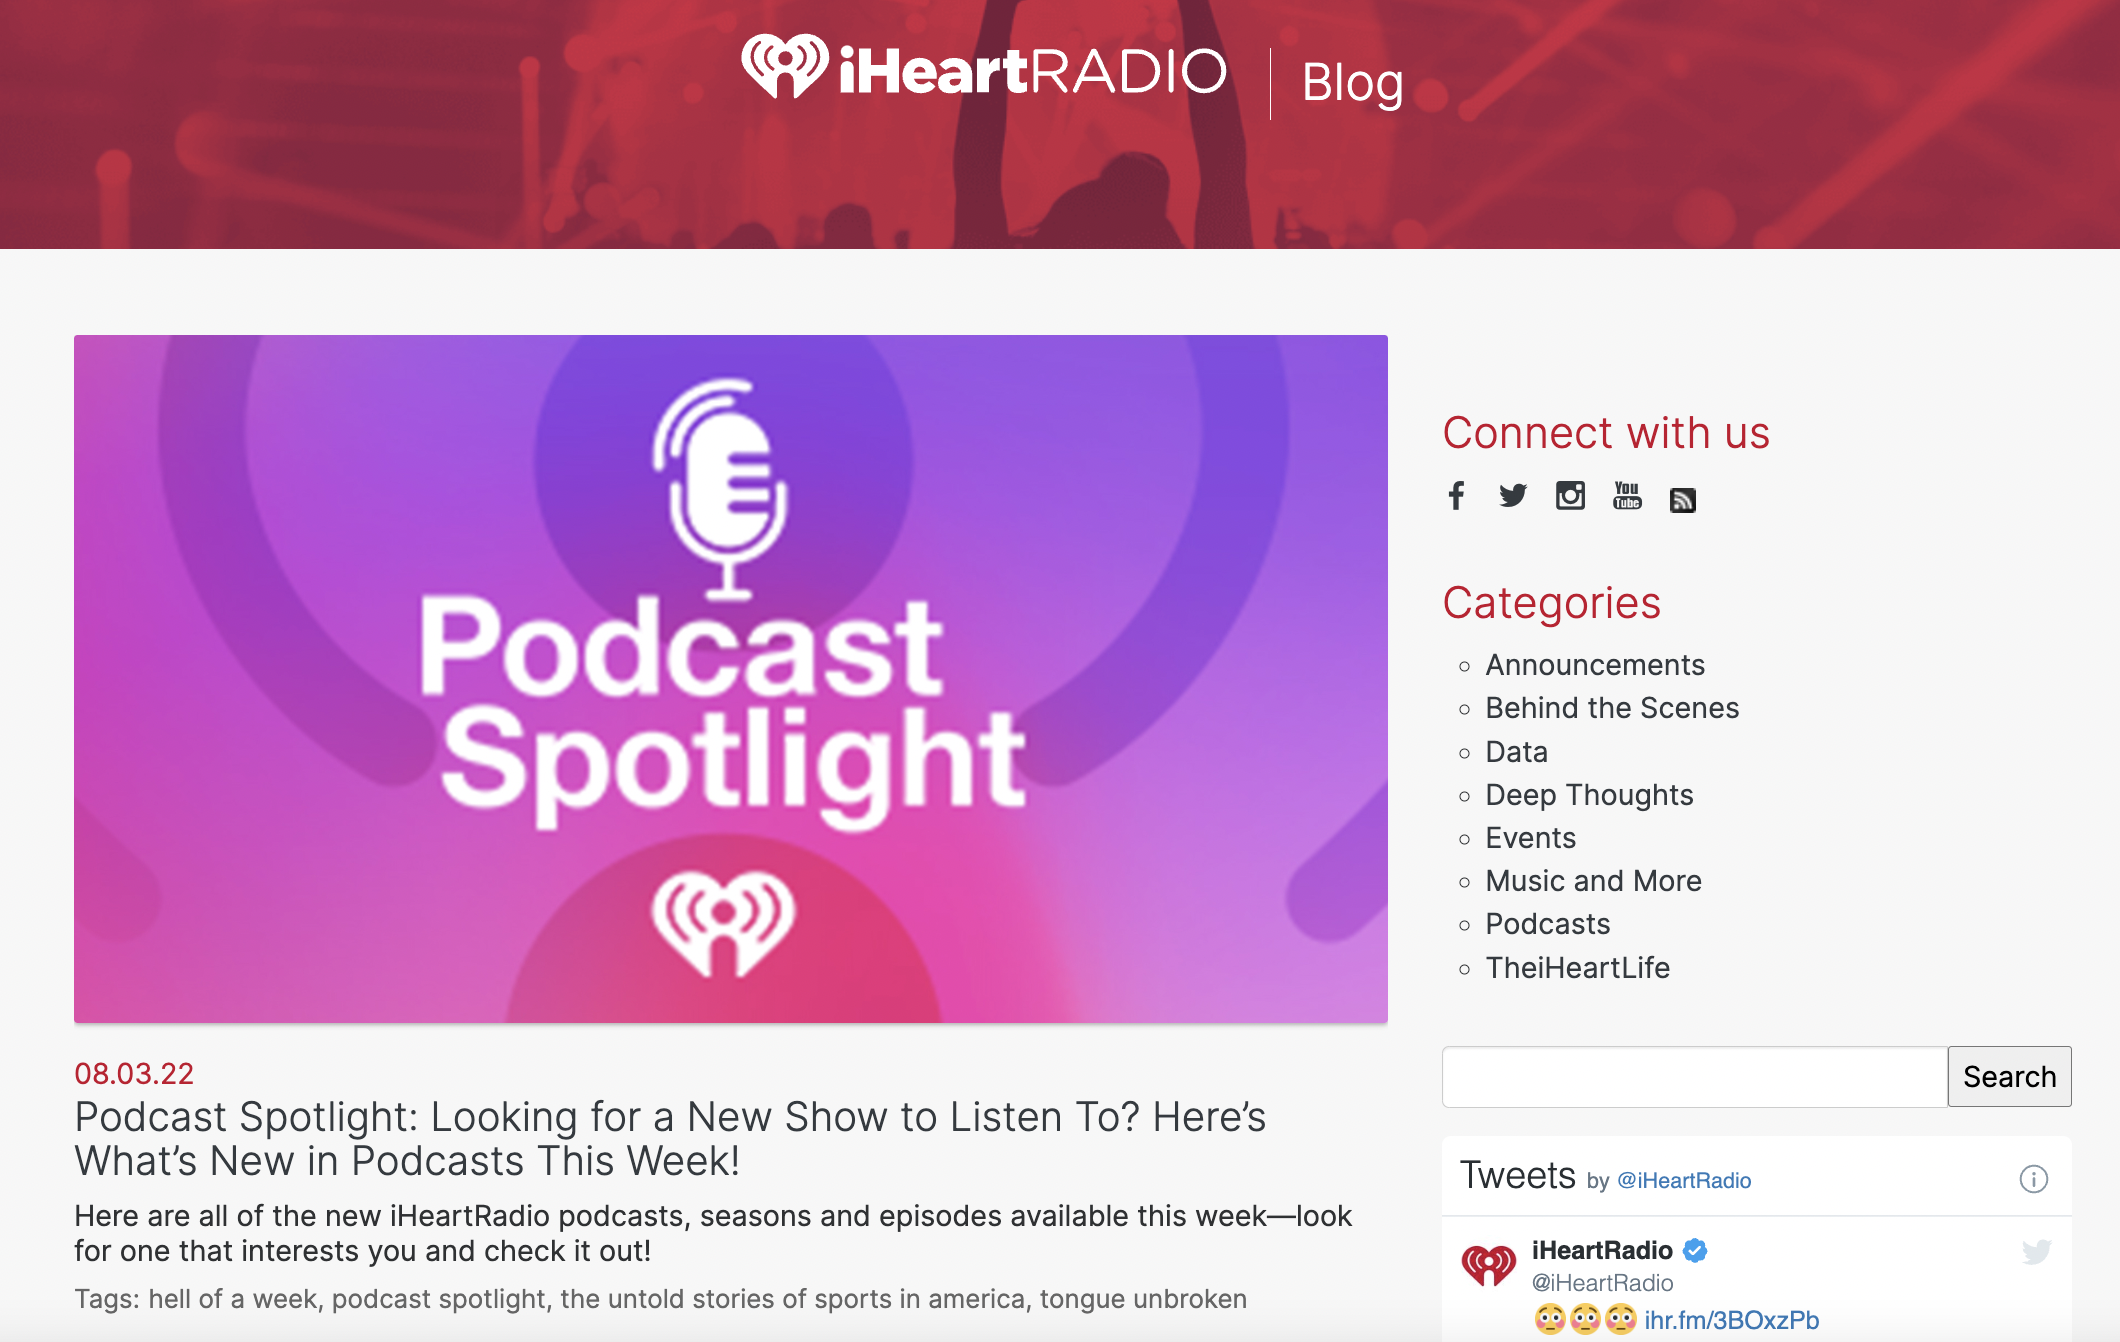 iHeartRadio blog content for app promotion